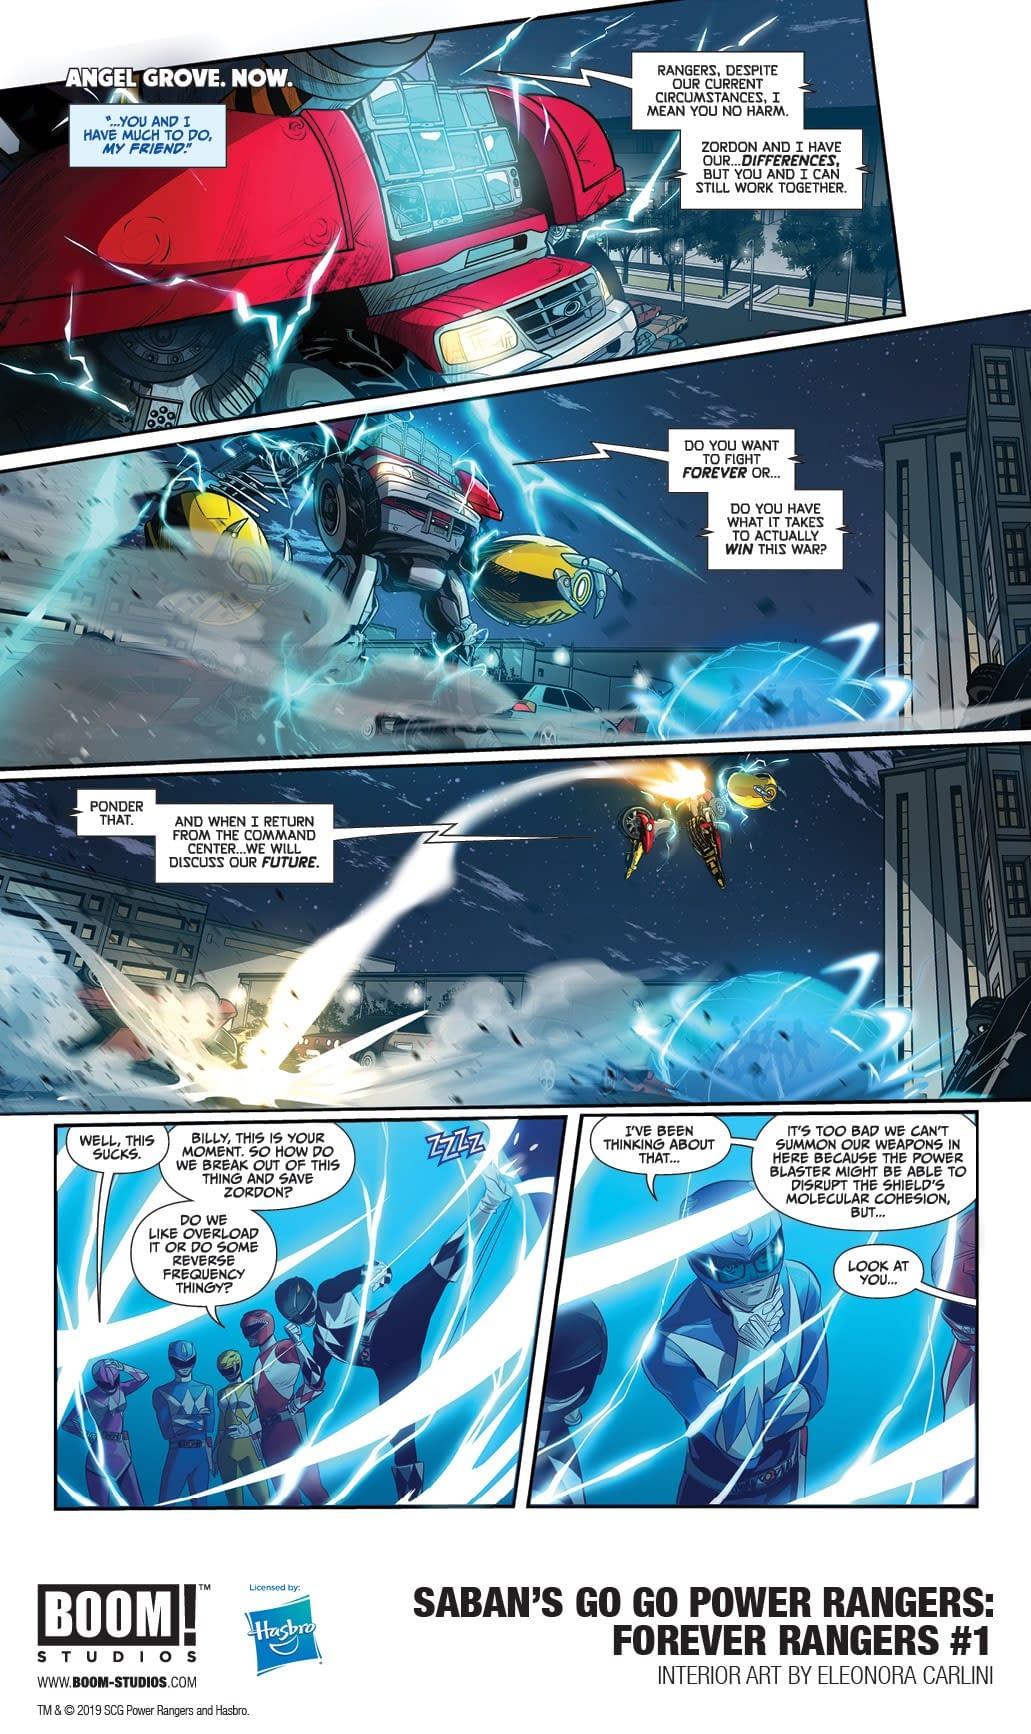 Go Back to the Future in Saban's Go Go Power Rangers: Forever Rangers Preview